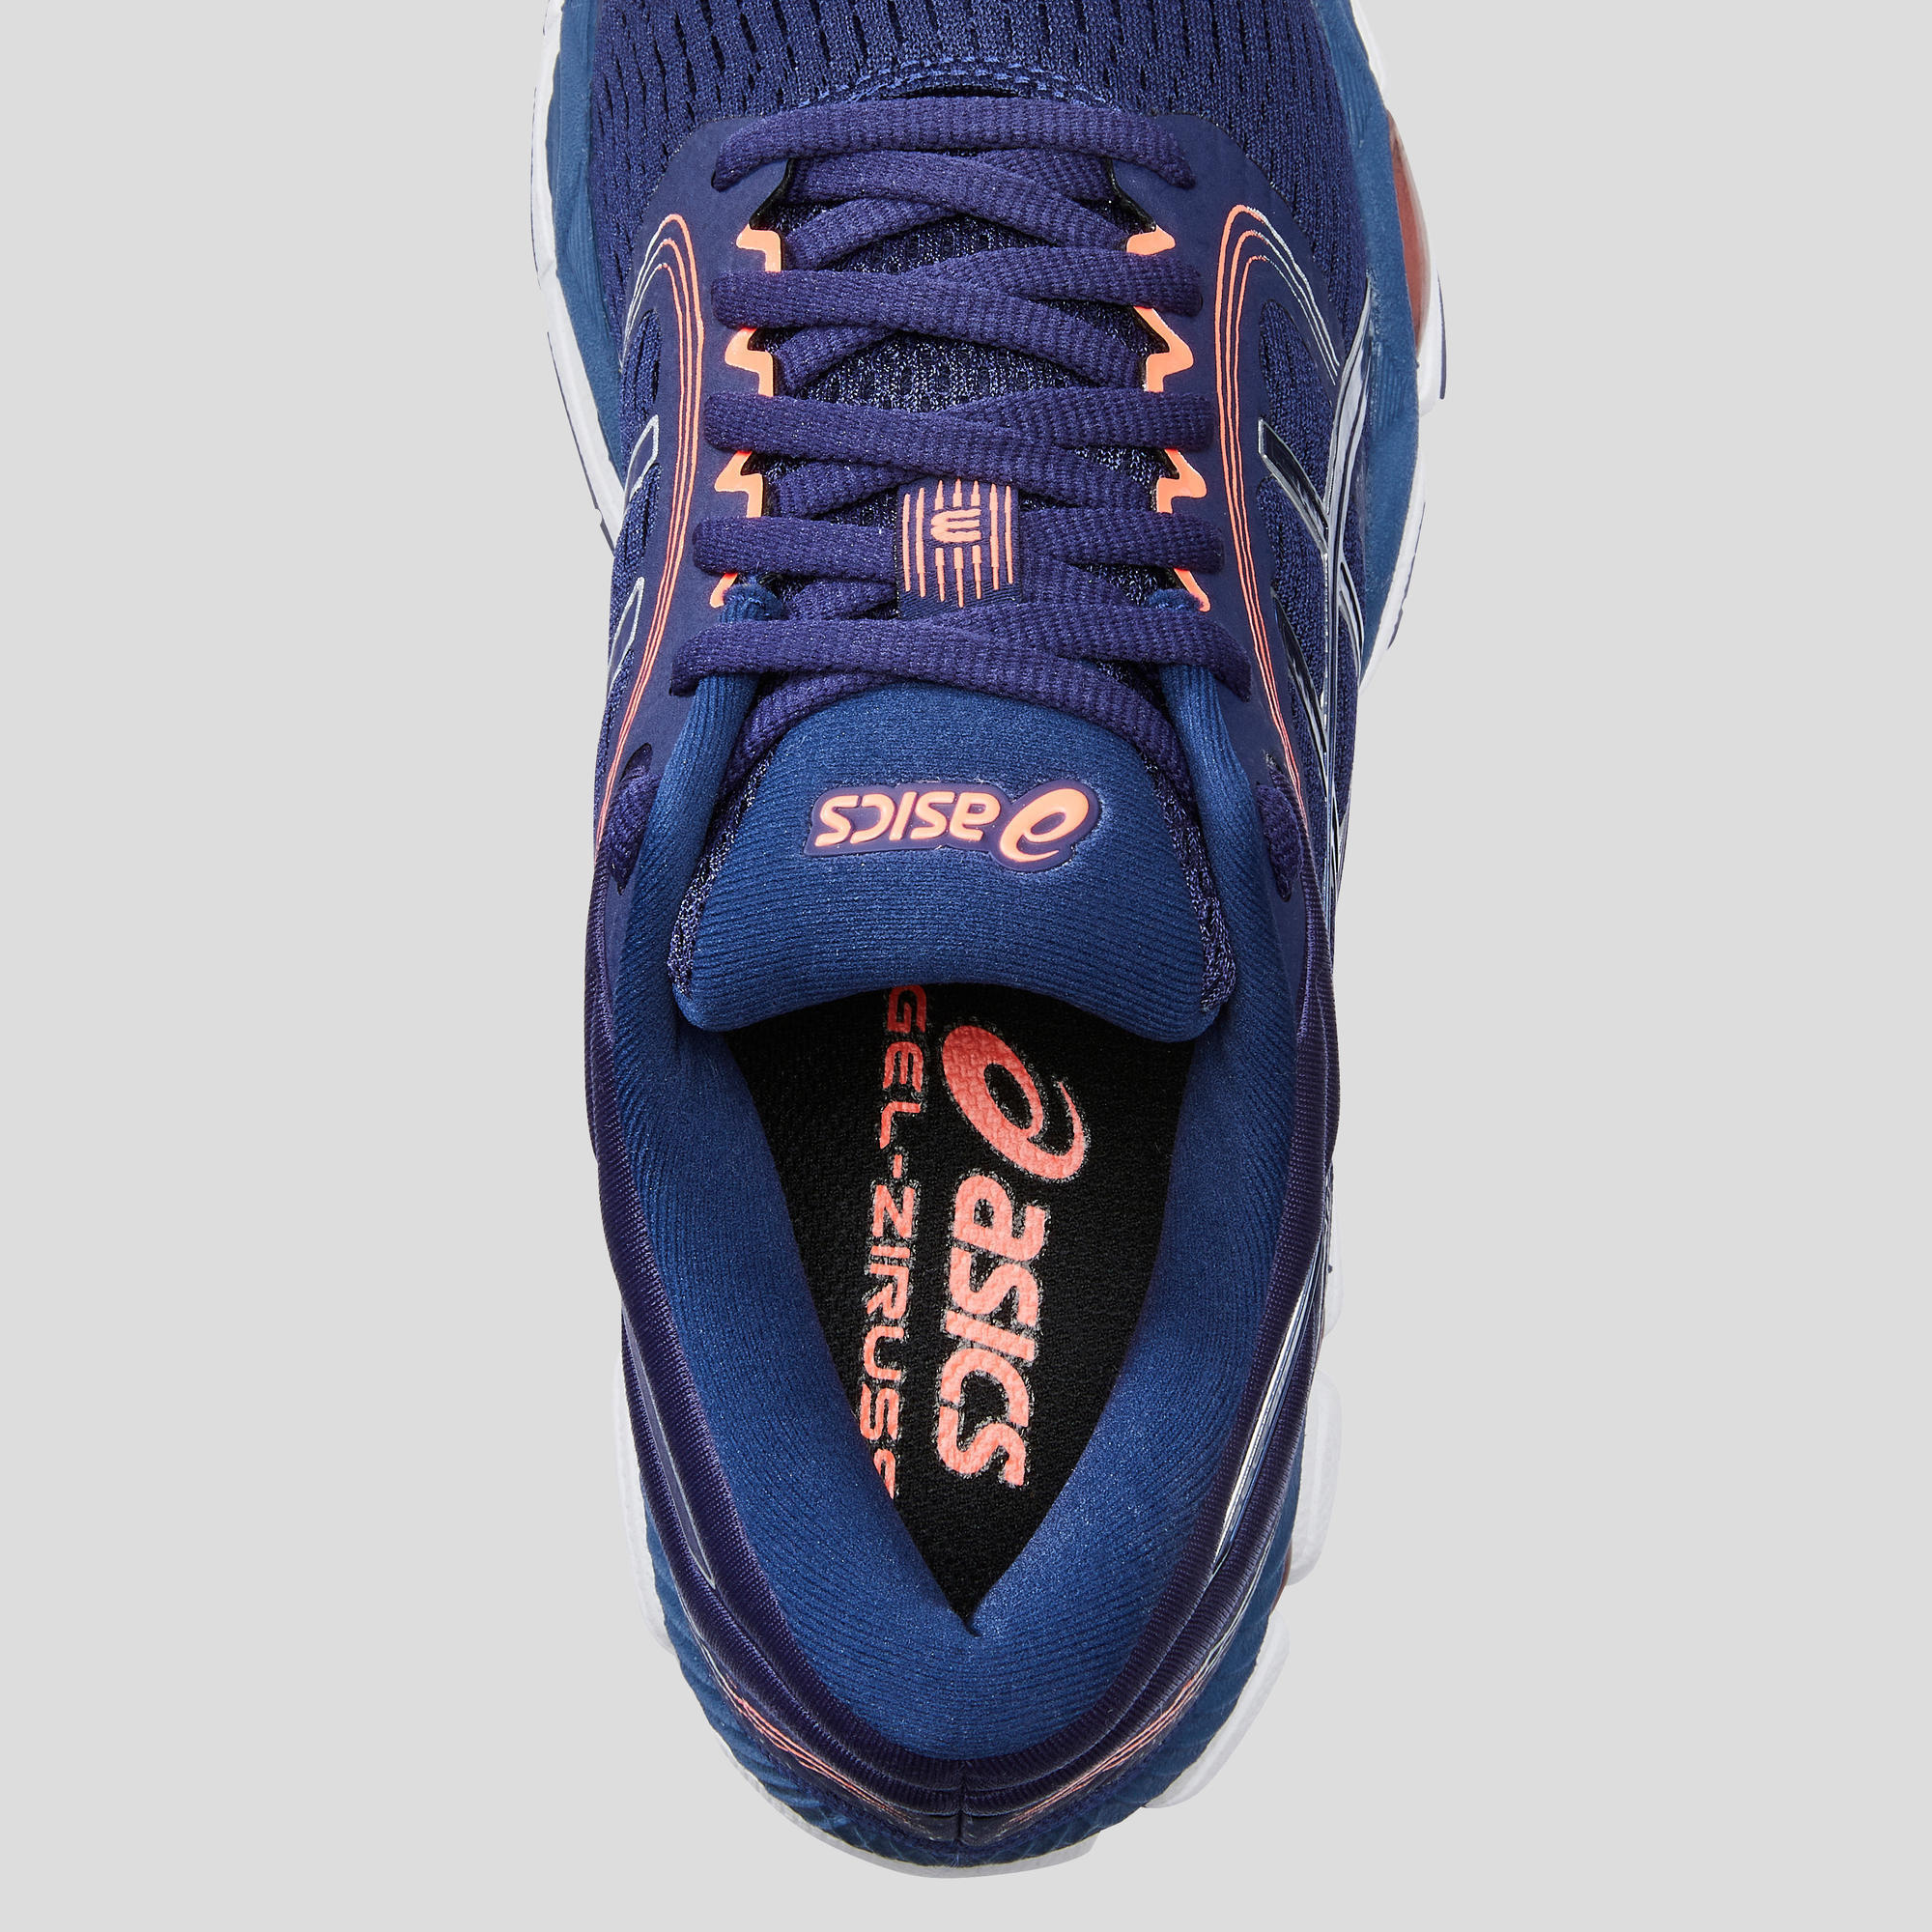 asics blue and pink